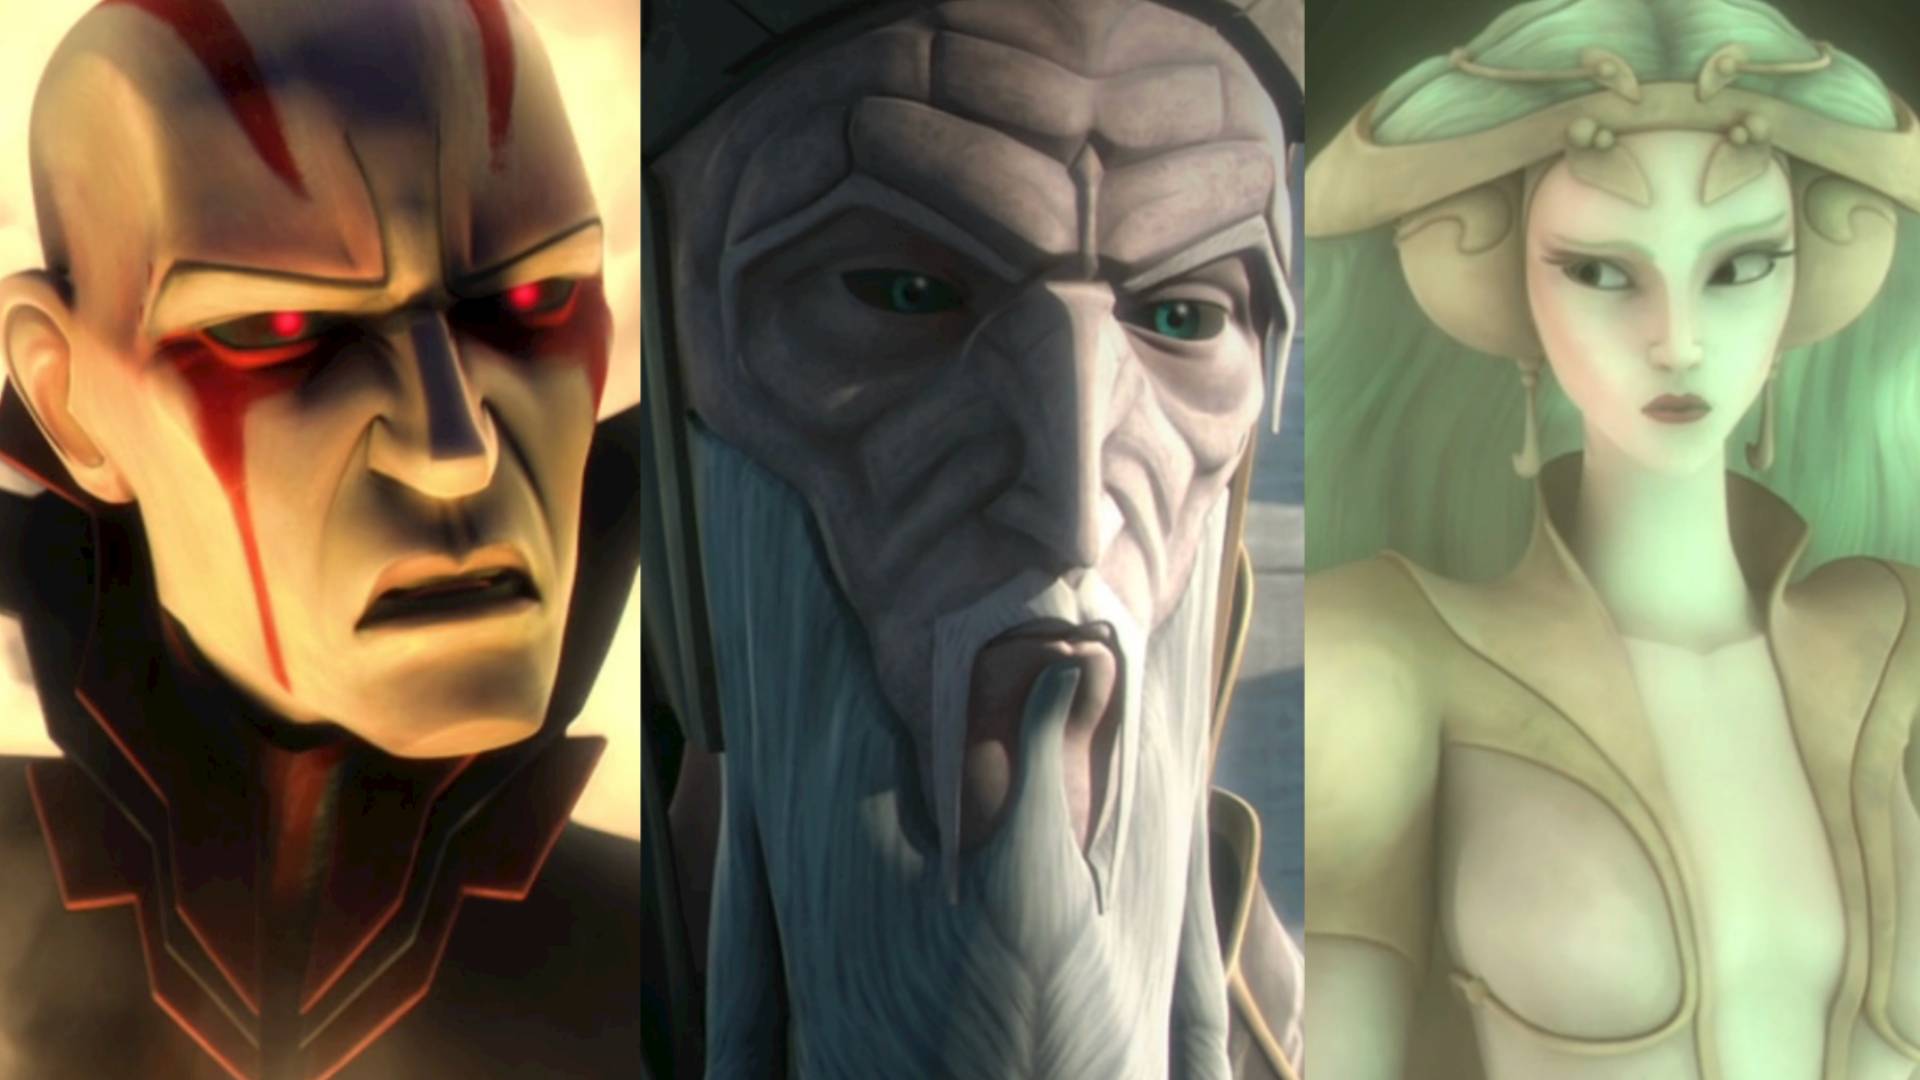 The Mortis gods in Star Wars: The Clone Wars